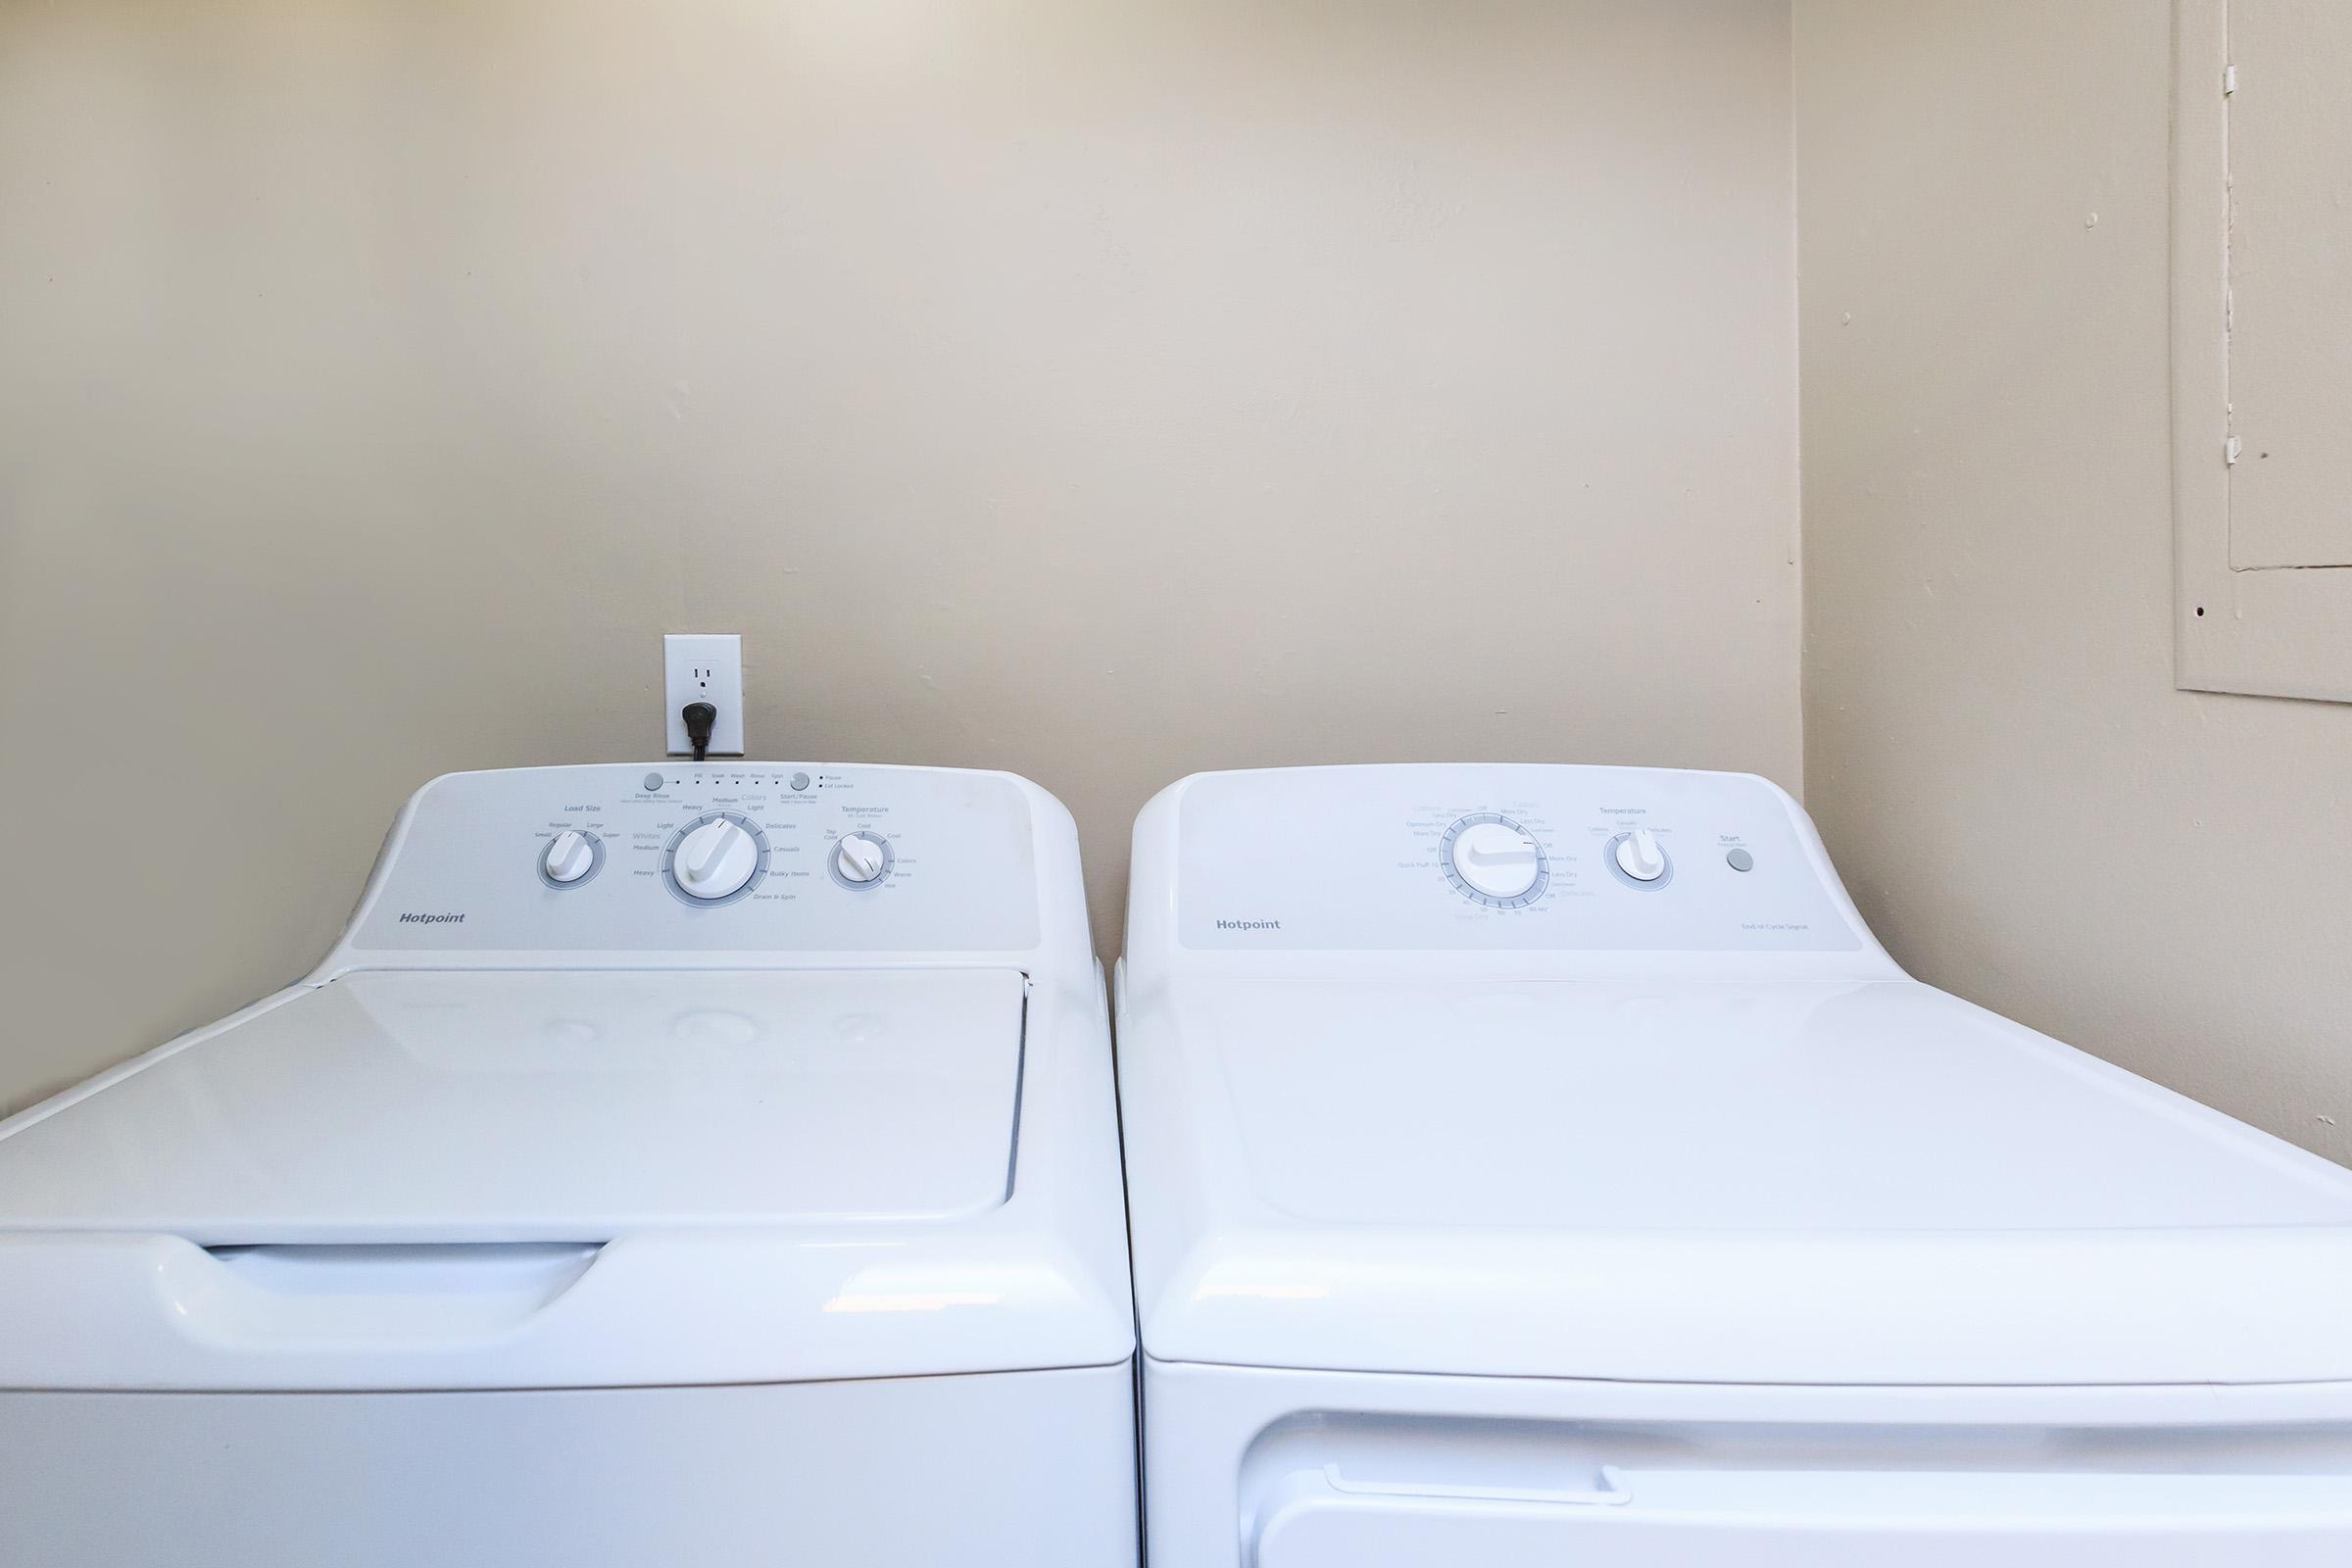 Washer and Dryer at The Lincoln at Colony House in Murfreesboro, TN